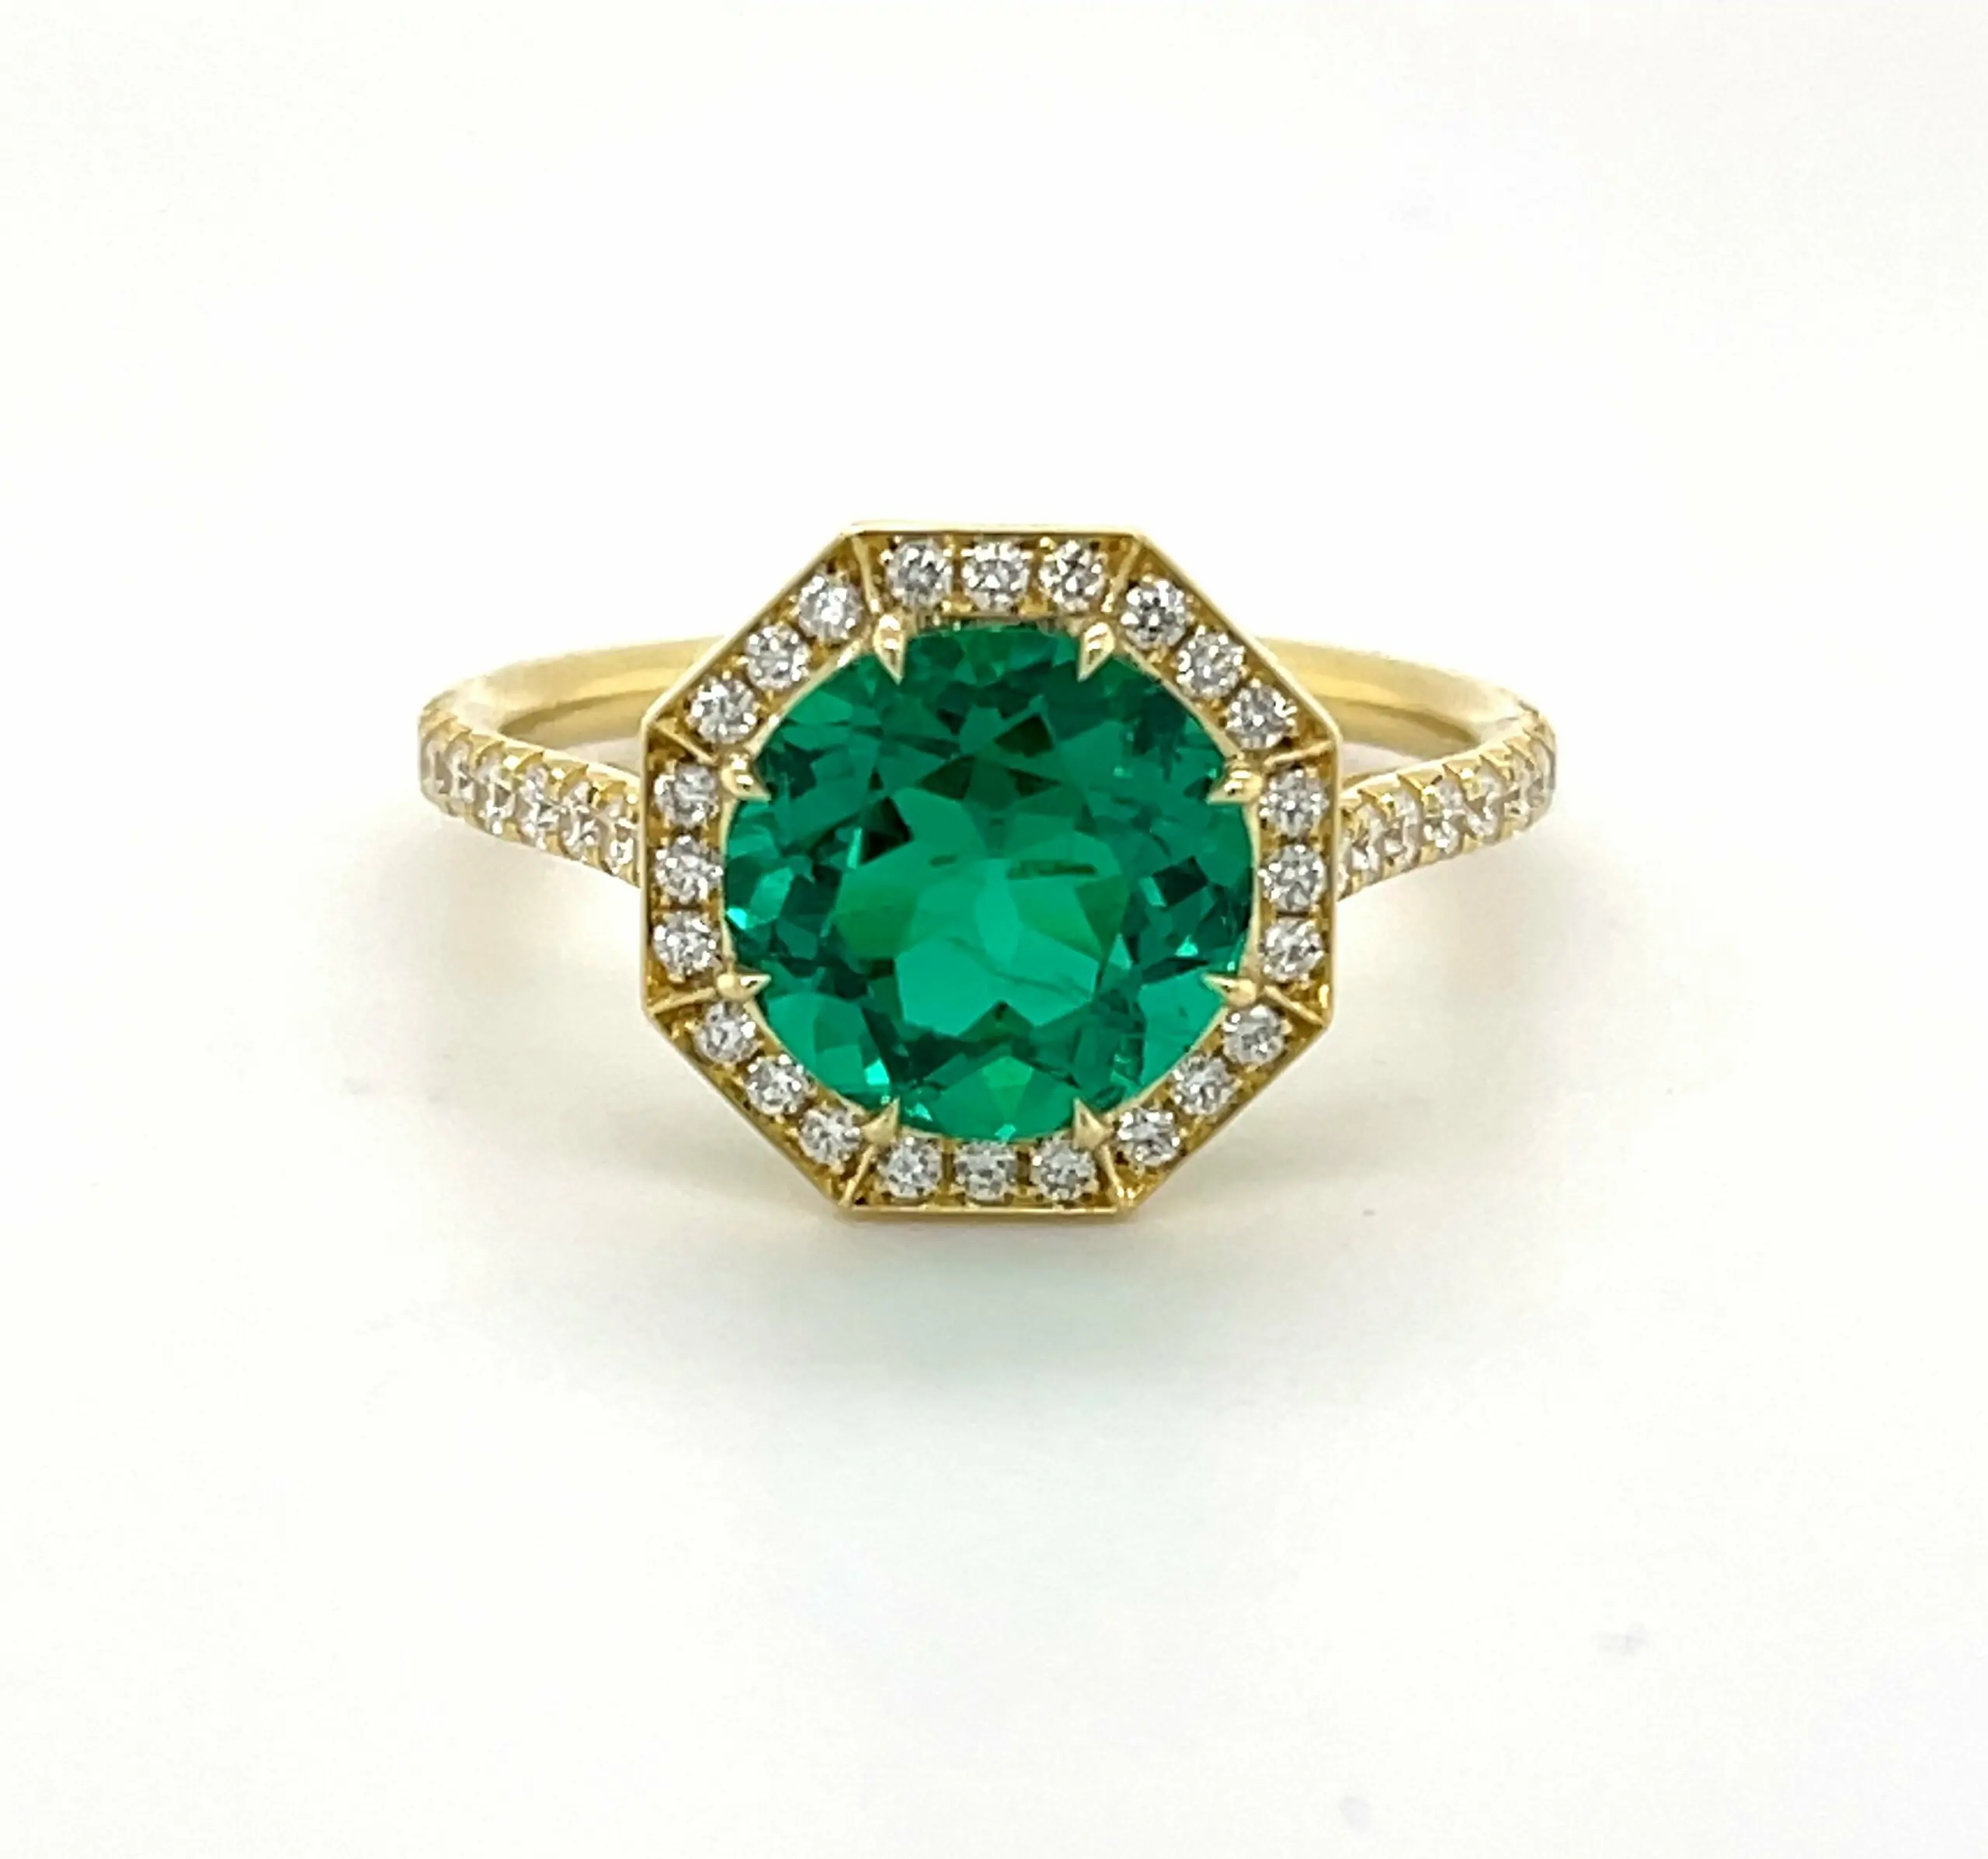 Round Emerald Ring in an 18k Yellow Gold Octagonal Setting Fine Colored Gemstone Rings 2